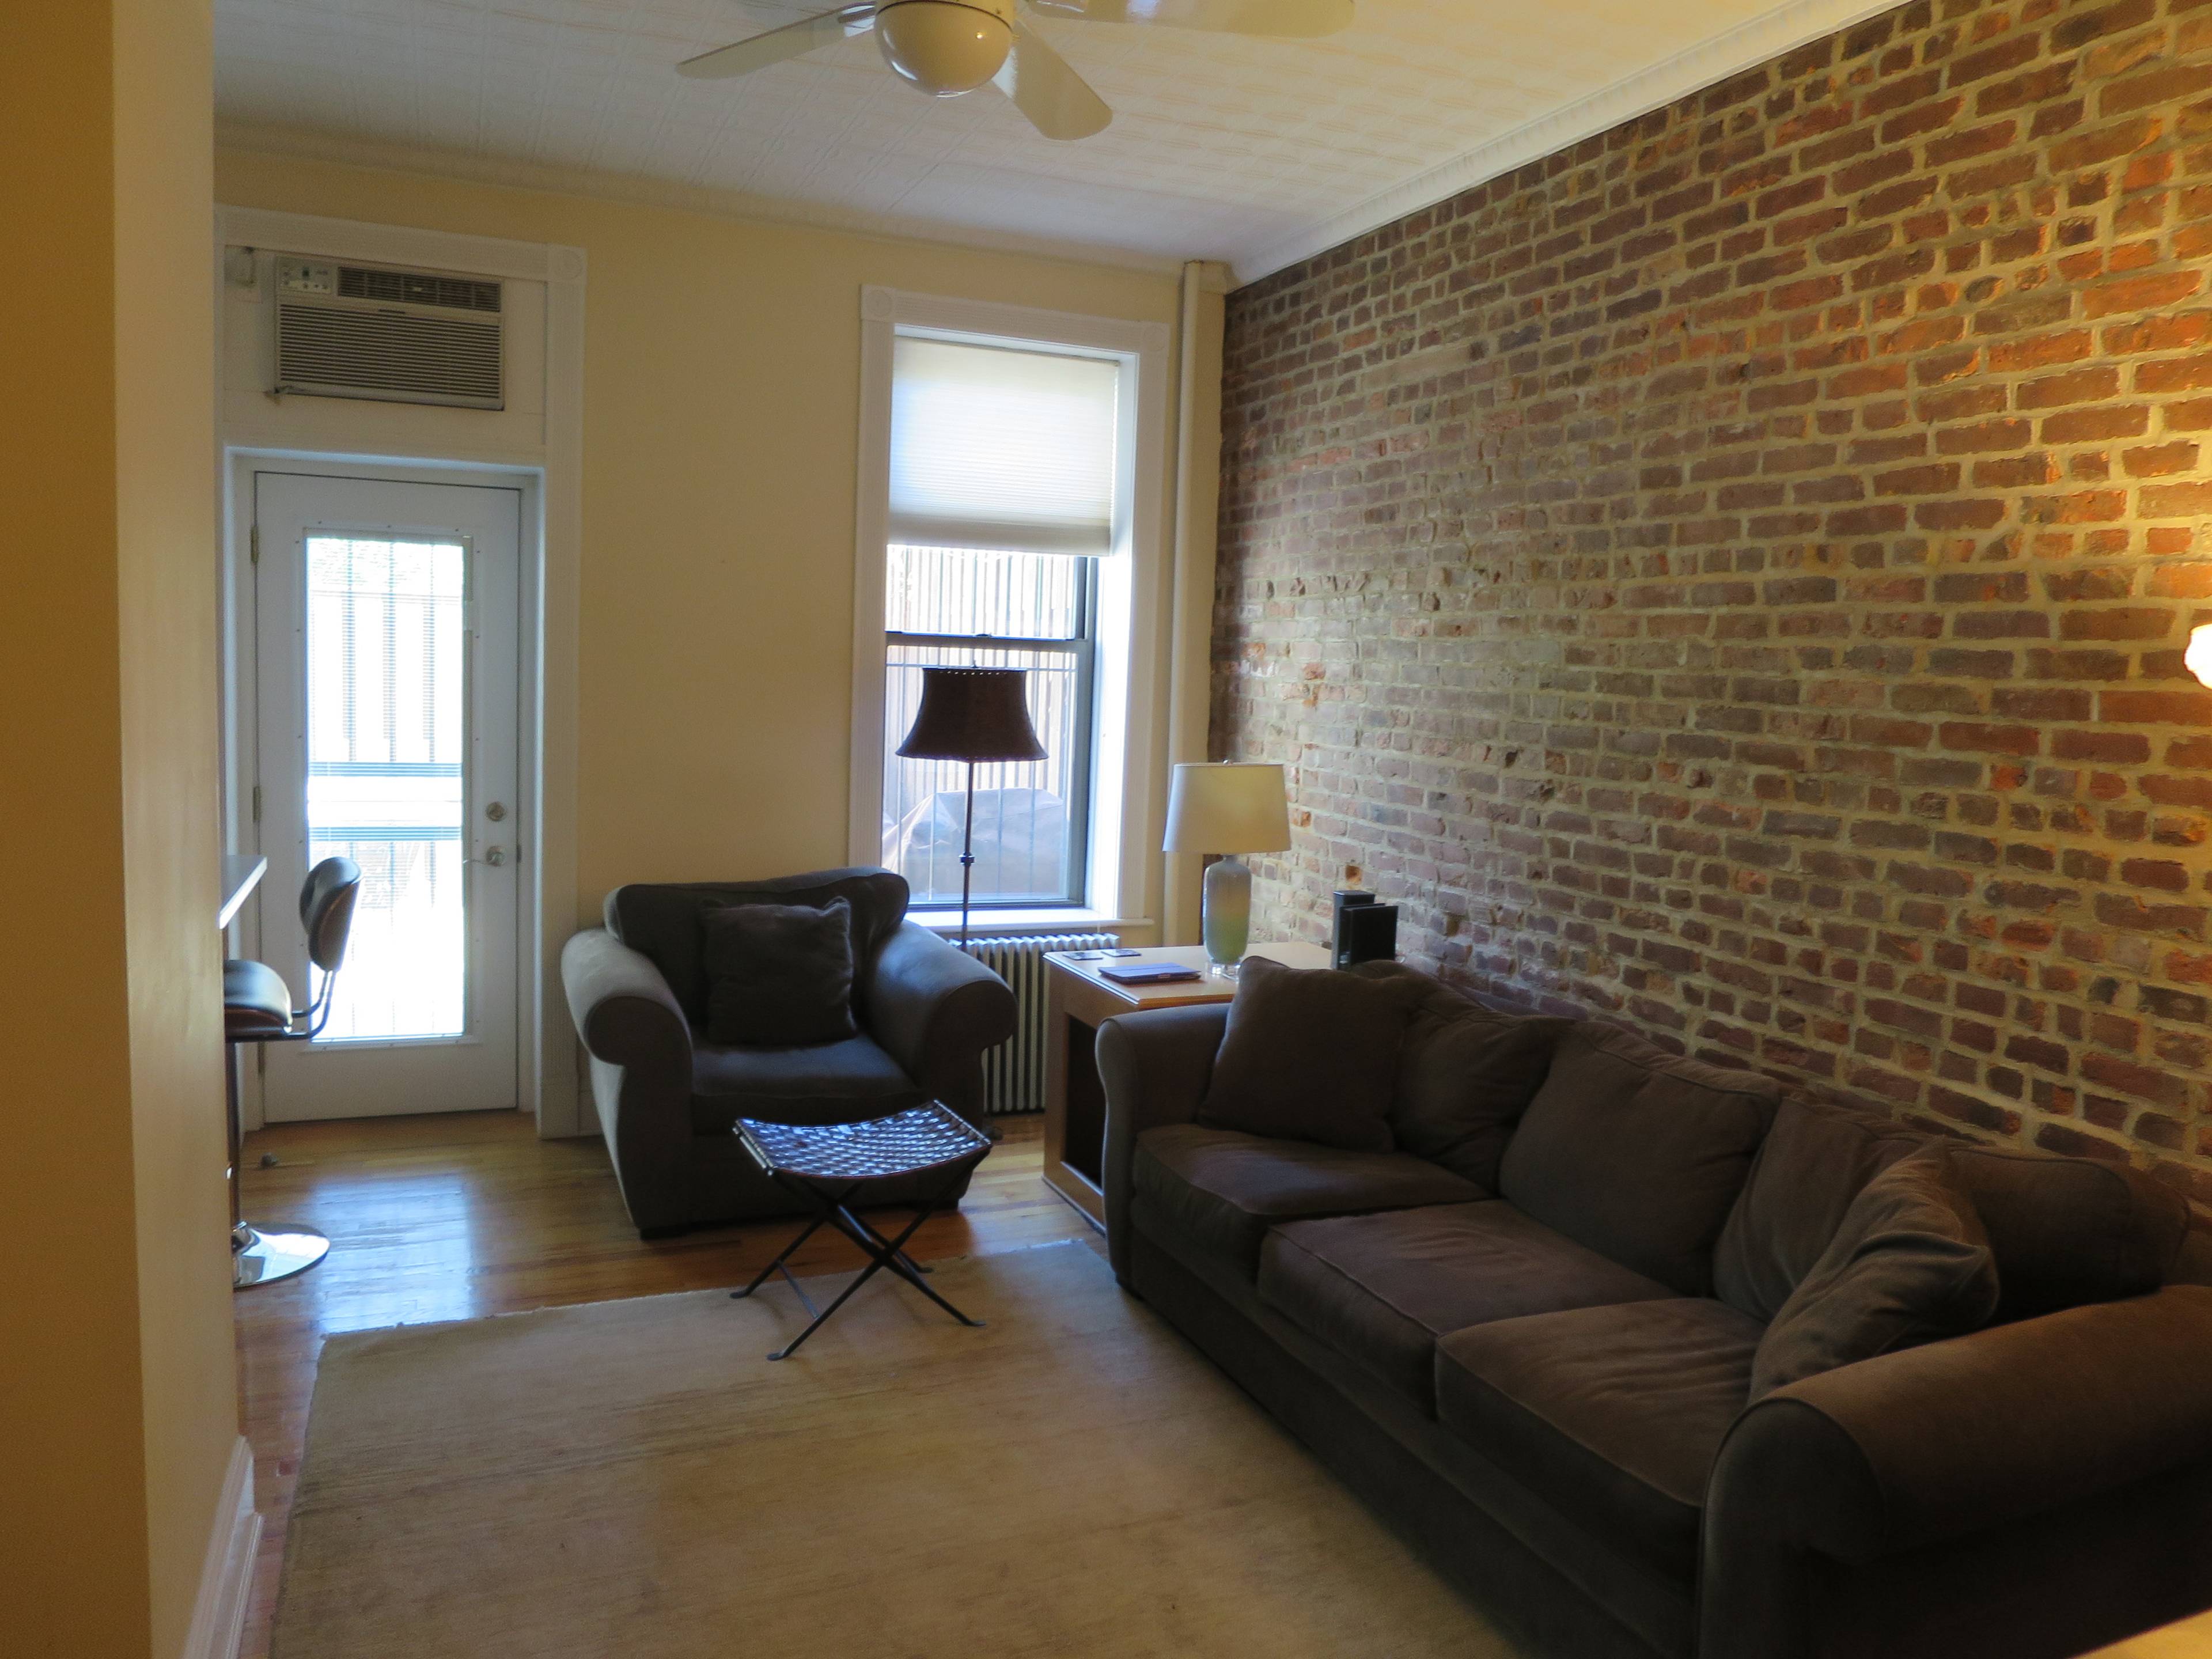 NO FEE ! Beautiful 1 bedroom apartment with huge deck for rent on 12th Street between 7th amp ; 8th Avenues in South Slope, Beautiful wood floors throughout, custom maple ...